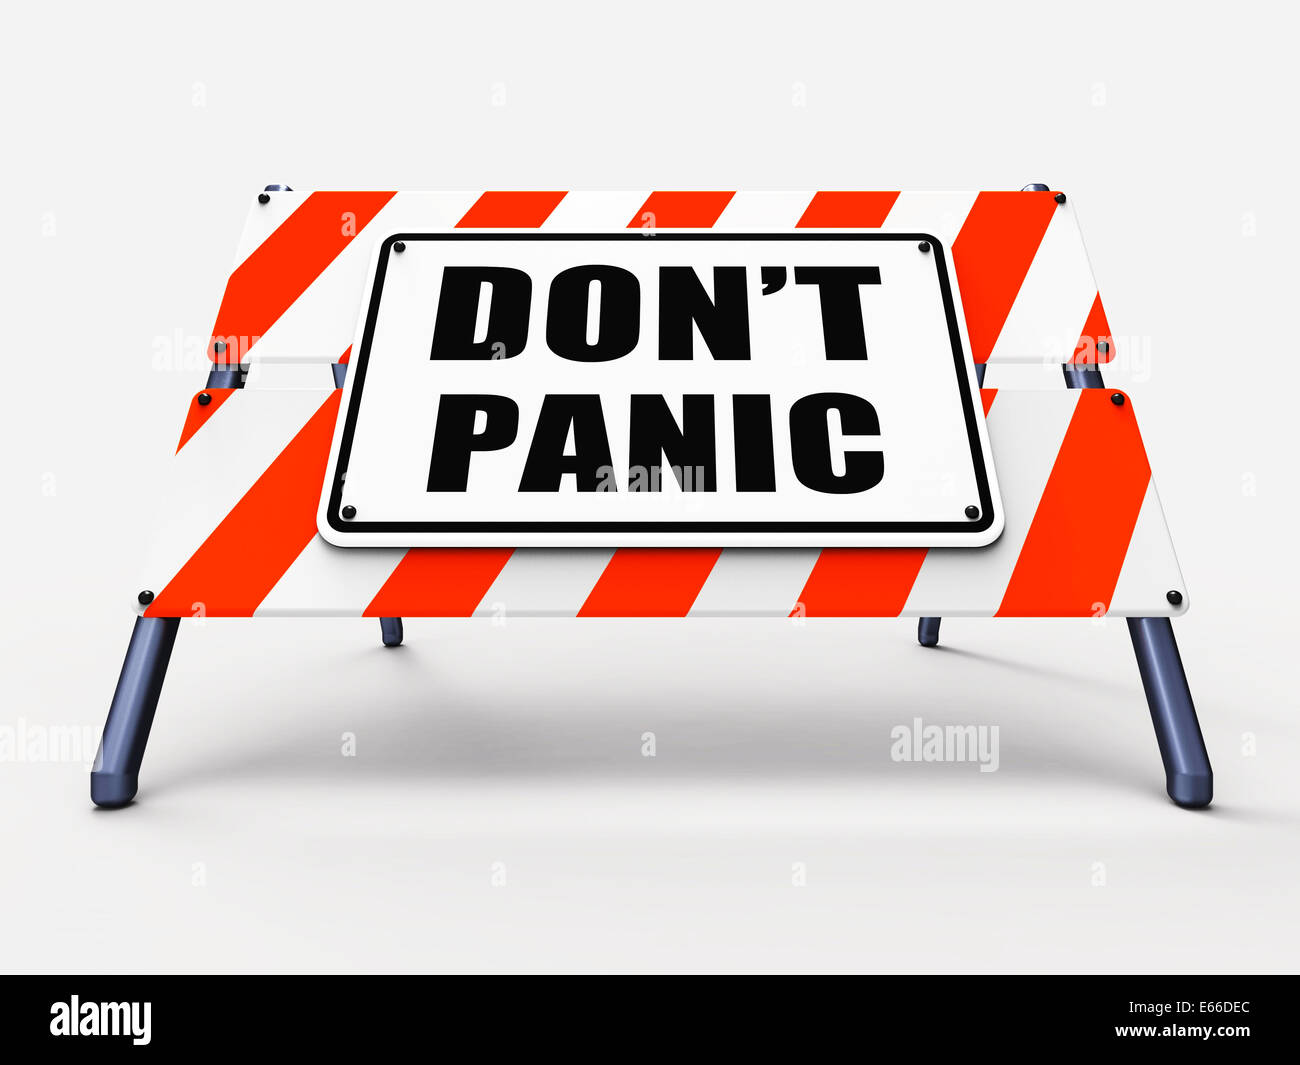 Dont Panic Sign Referring to Relaxing and Avoid Panicking Stock Photo